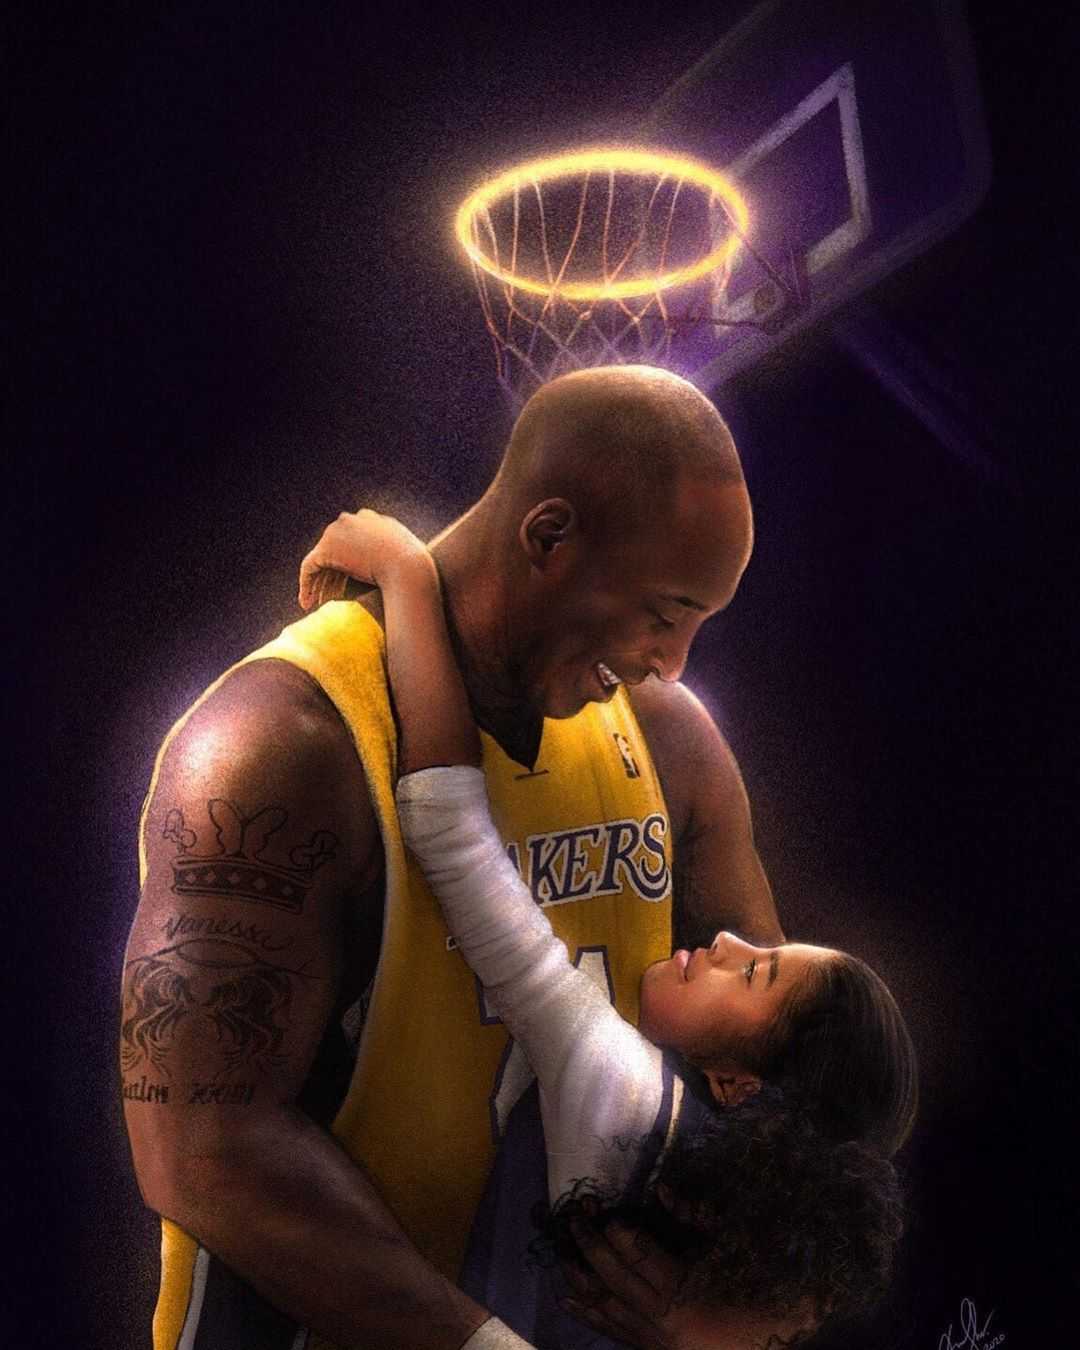 Kobe Bryant and his daughter Gianna Bryant in a picture with a halo around them. - Kobe Bryant